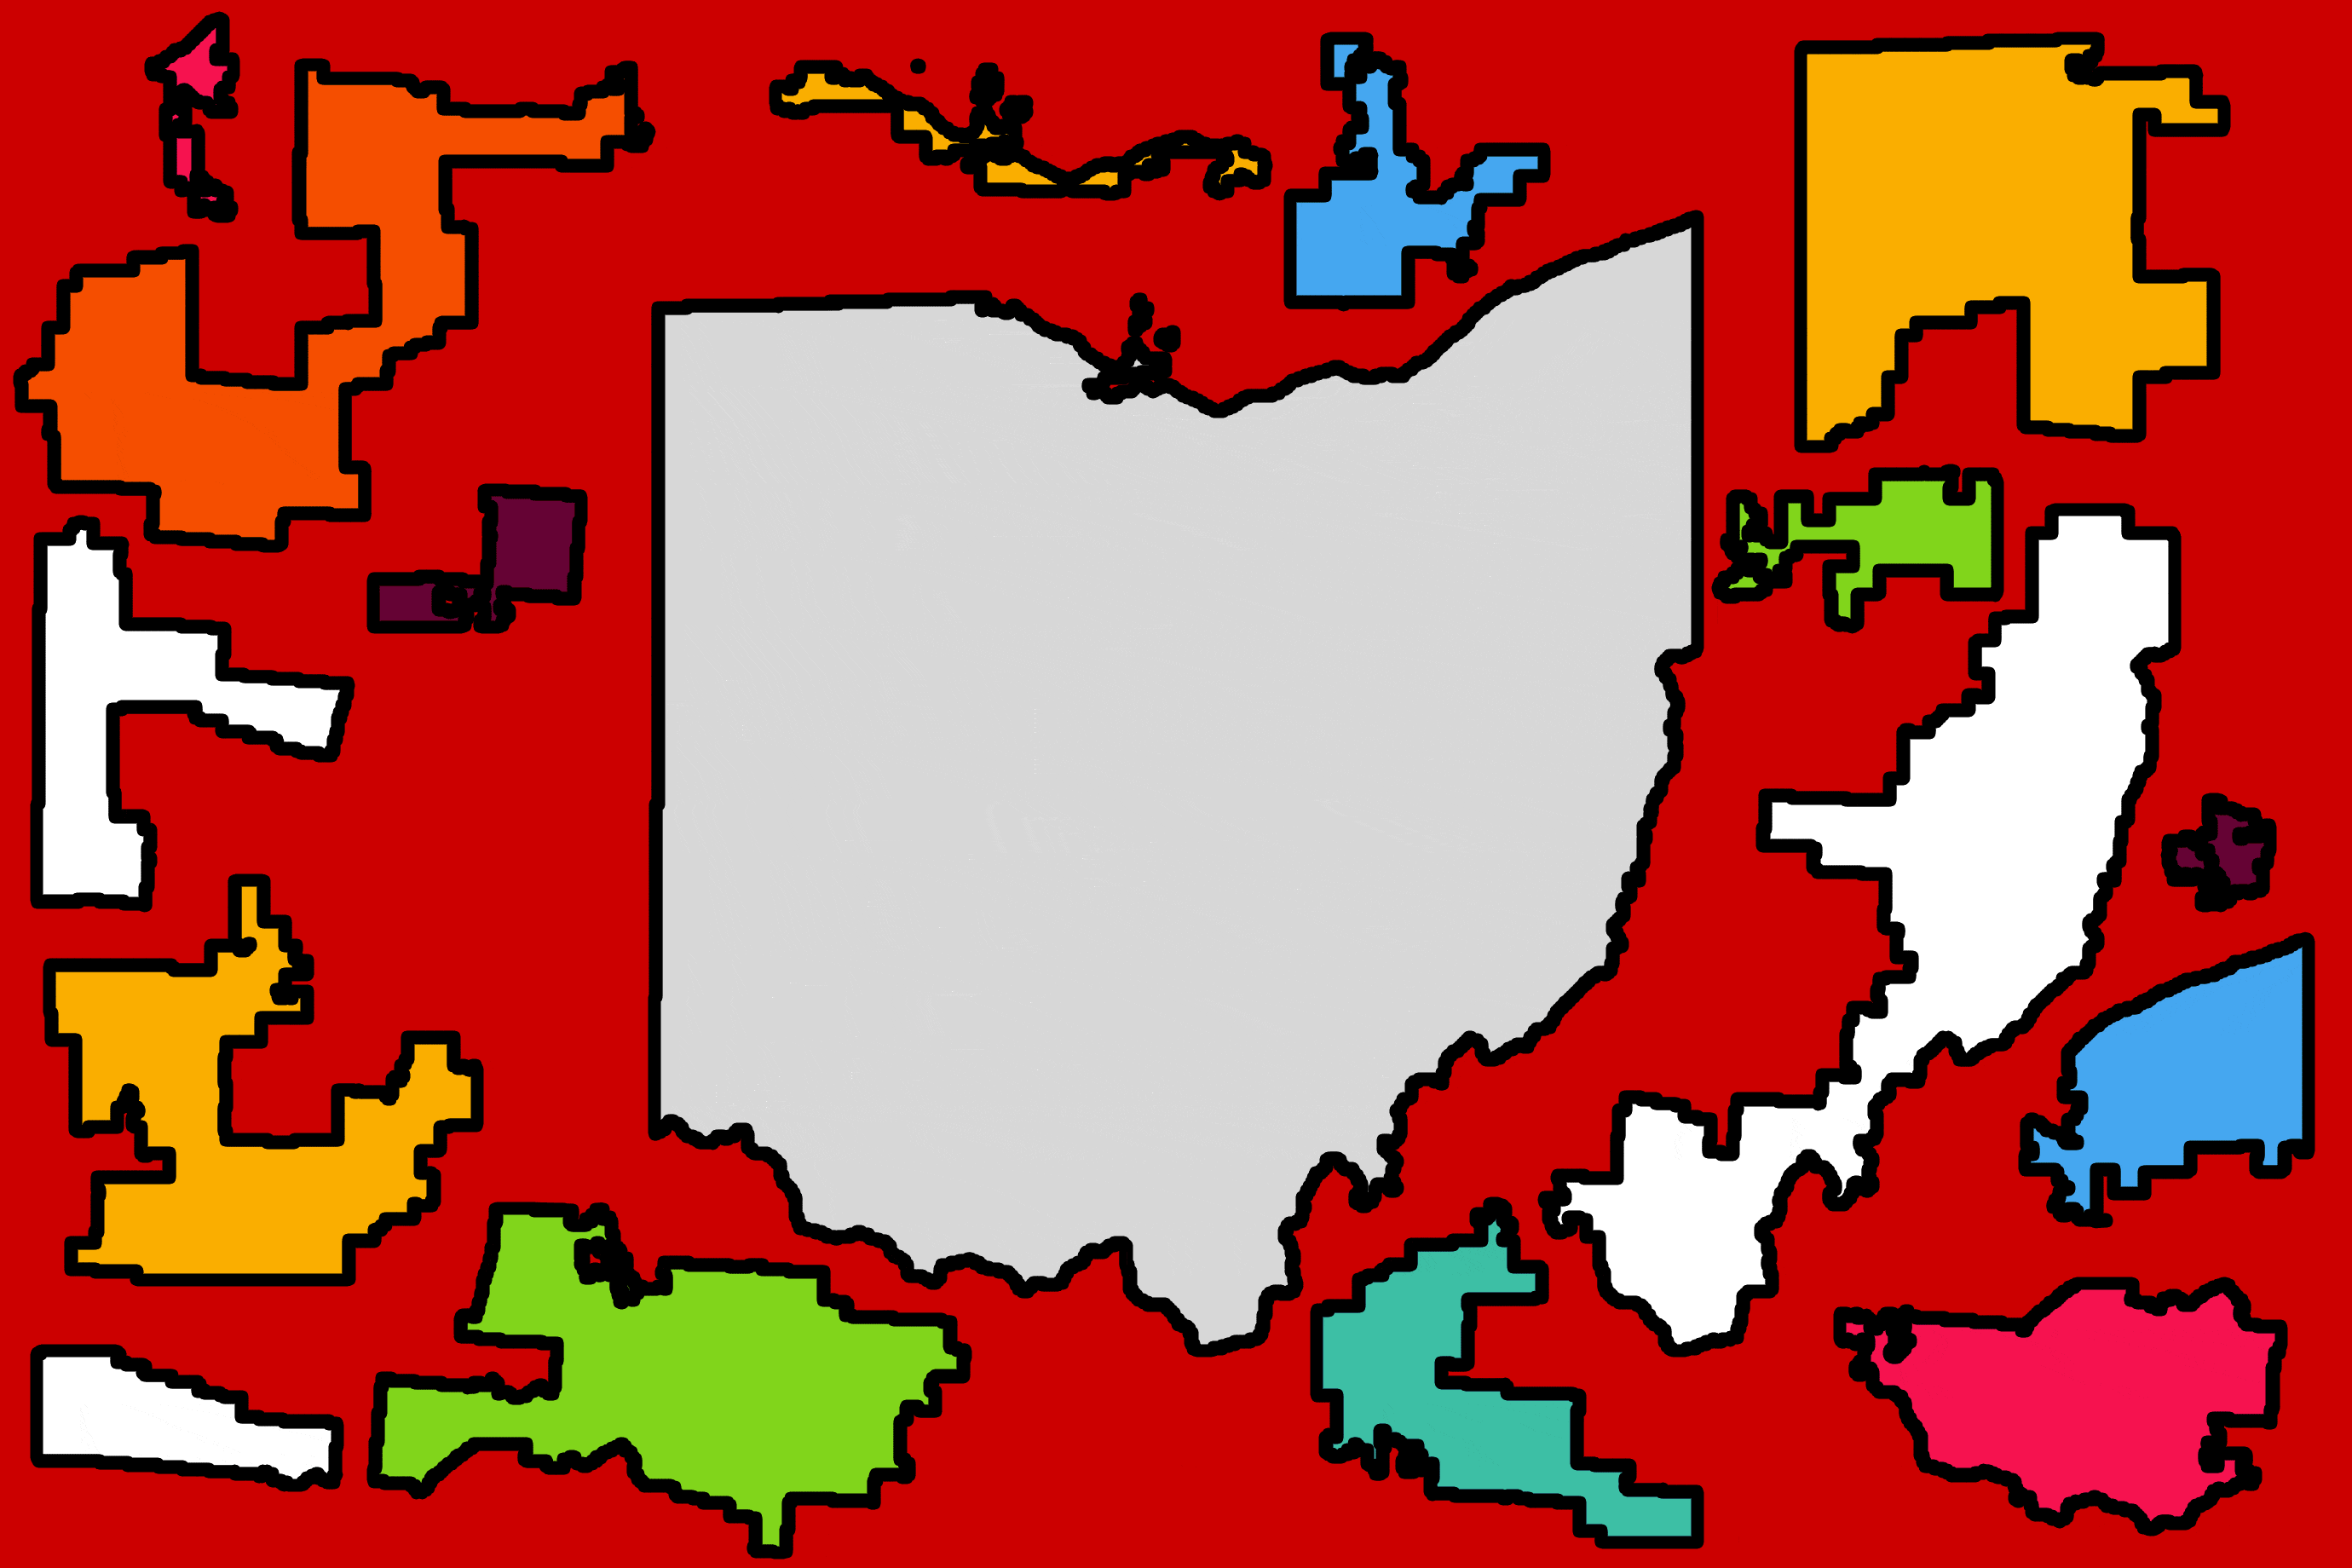 Animated puzzle of Ohio's redistricting map